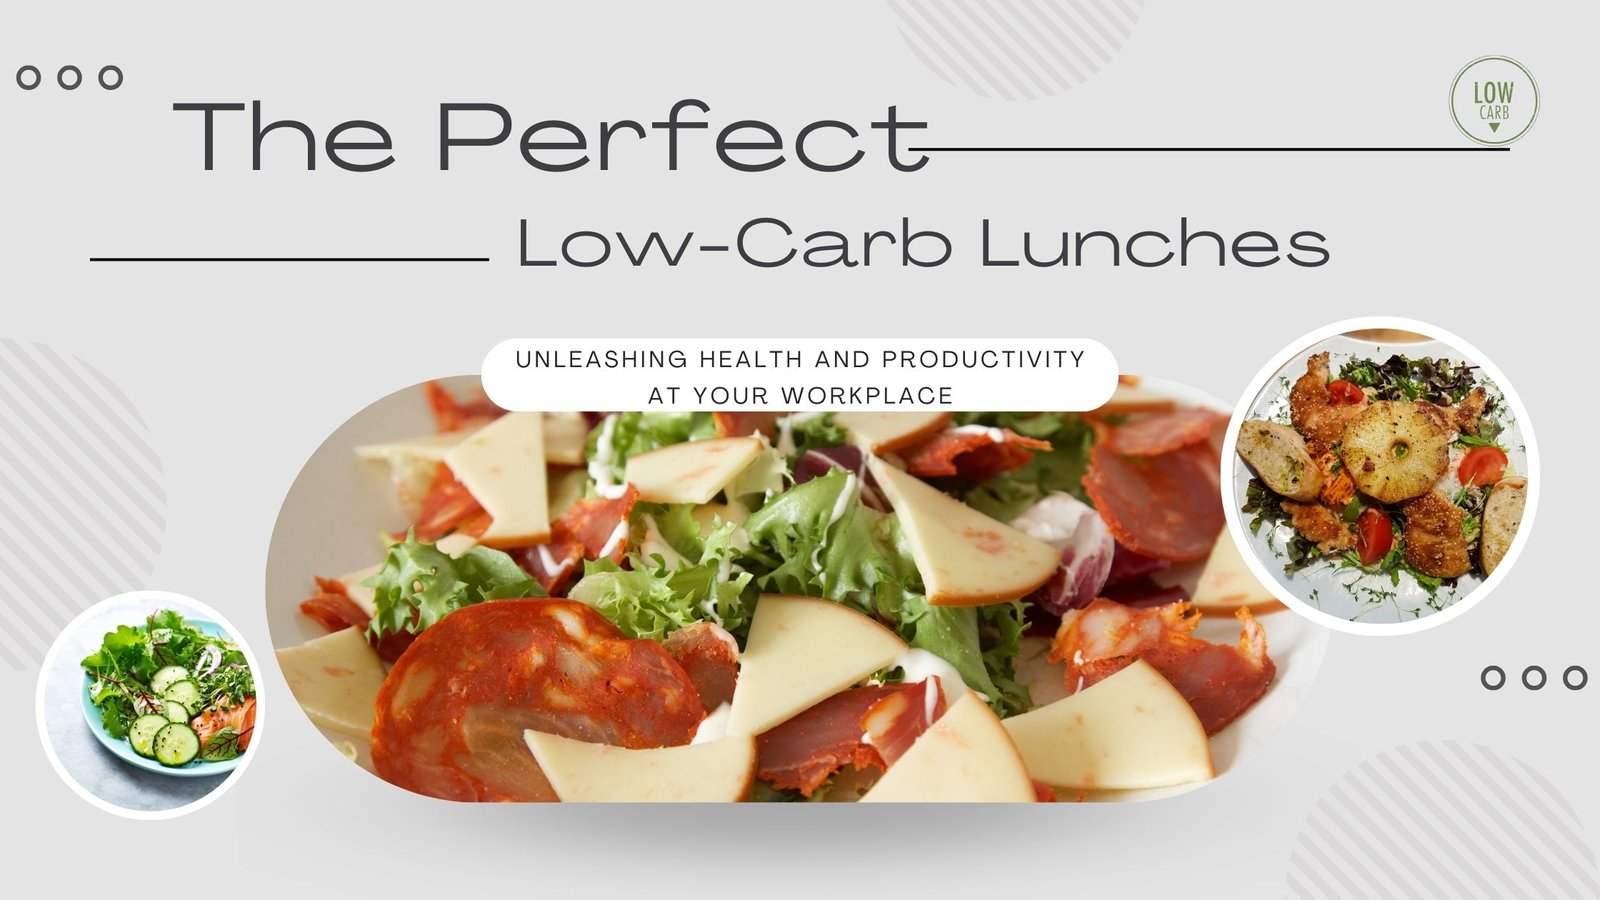 Low-Carb Lunches Unleashing Health and Productivity at Your Workplace